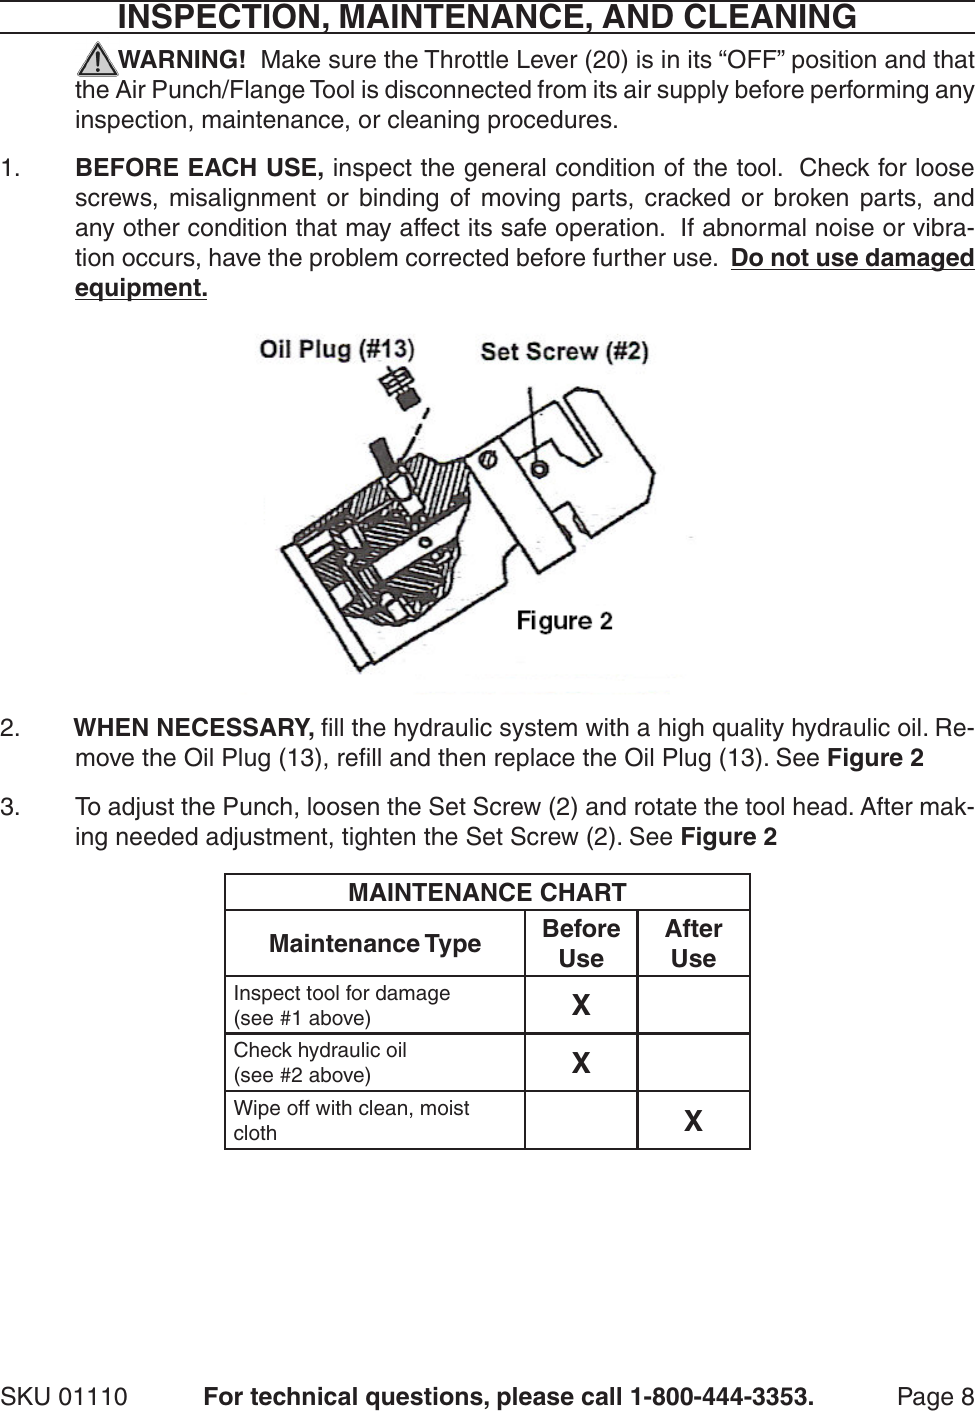 Page 8 of 11 - Harbor-Freight Harbor-Freight-Air-Punch-Flange-Tool-Product-Manual-  Harbor-freight-air-punch-flange-tool-product-manual